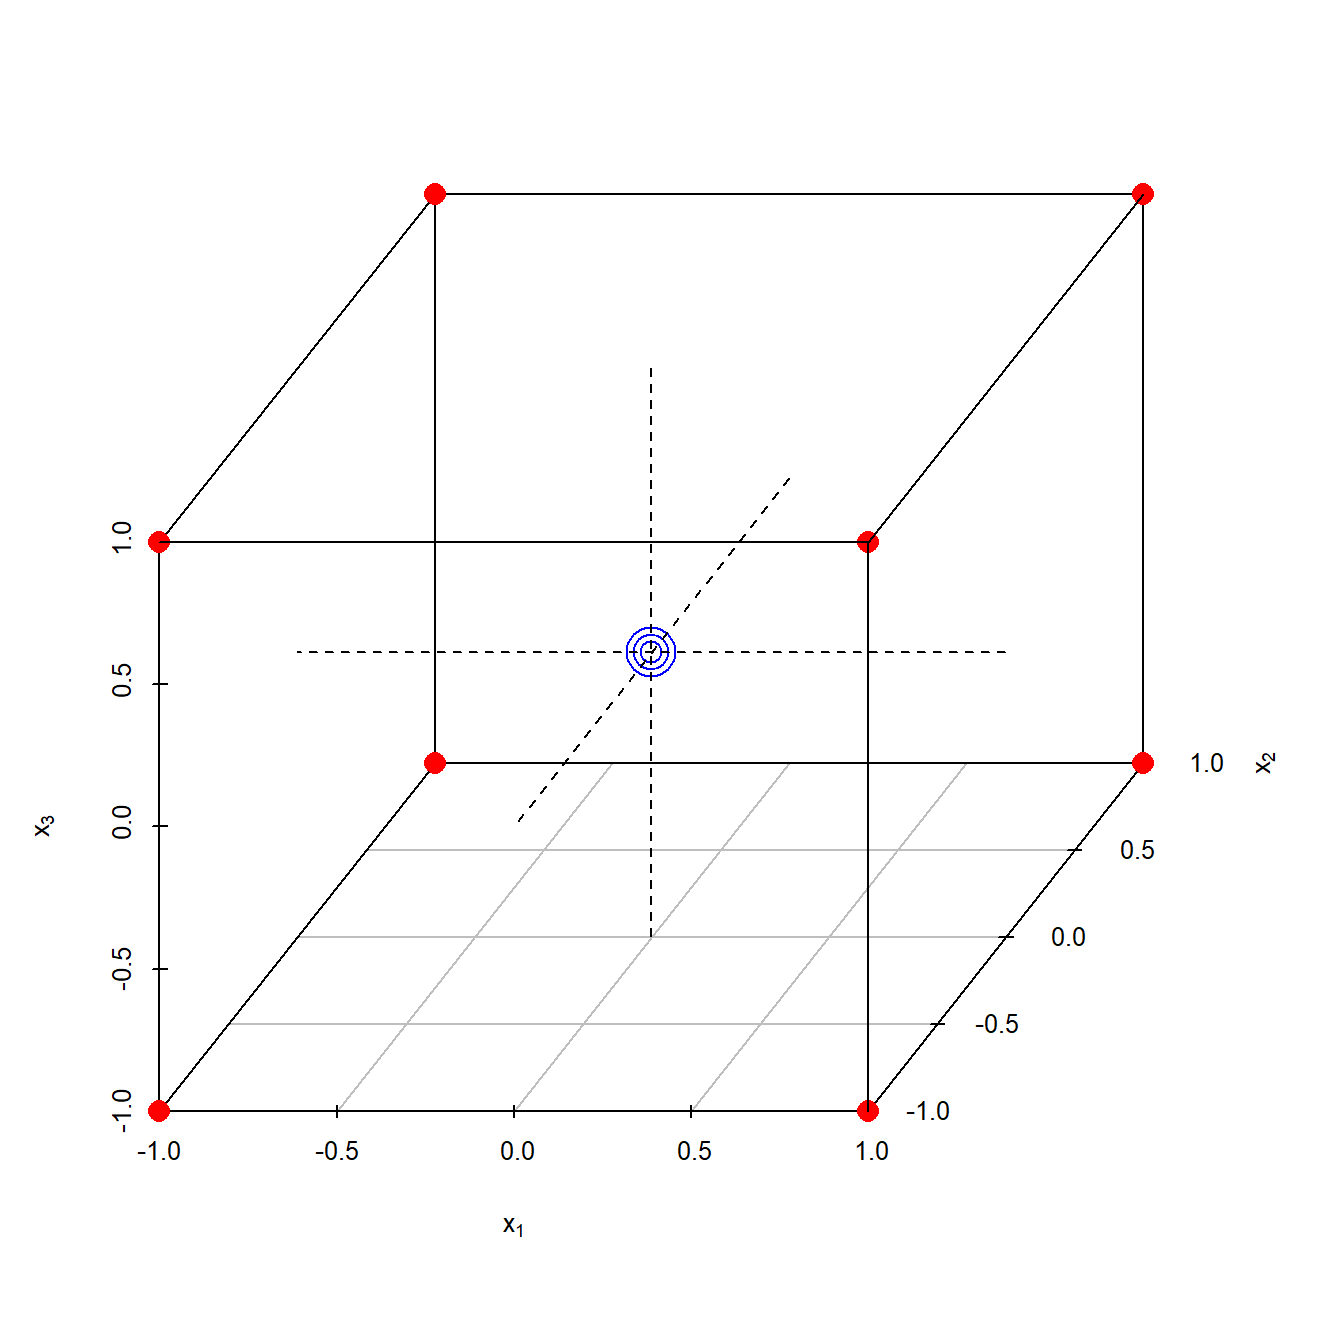 $2^3$ full factorial design with triple replicates marked blue in the center